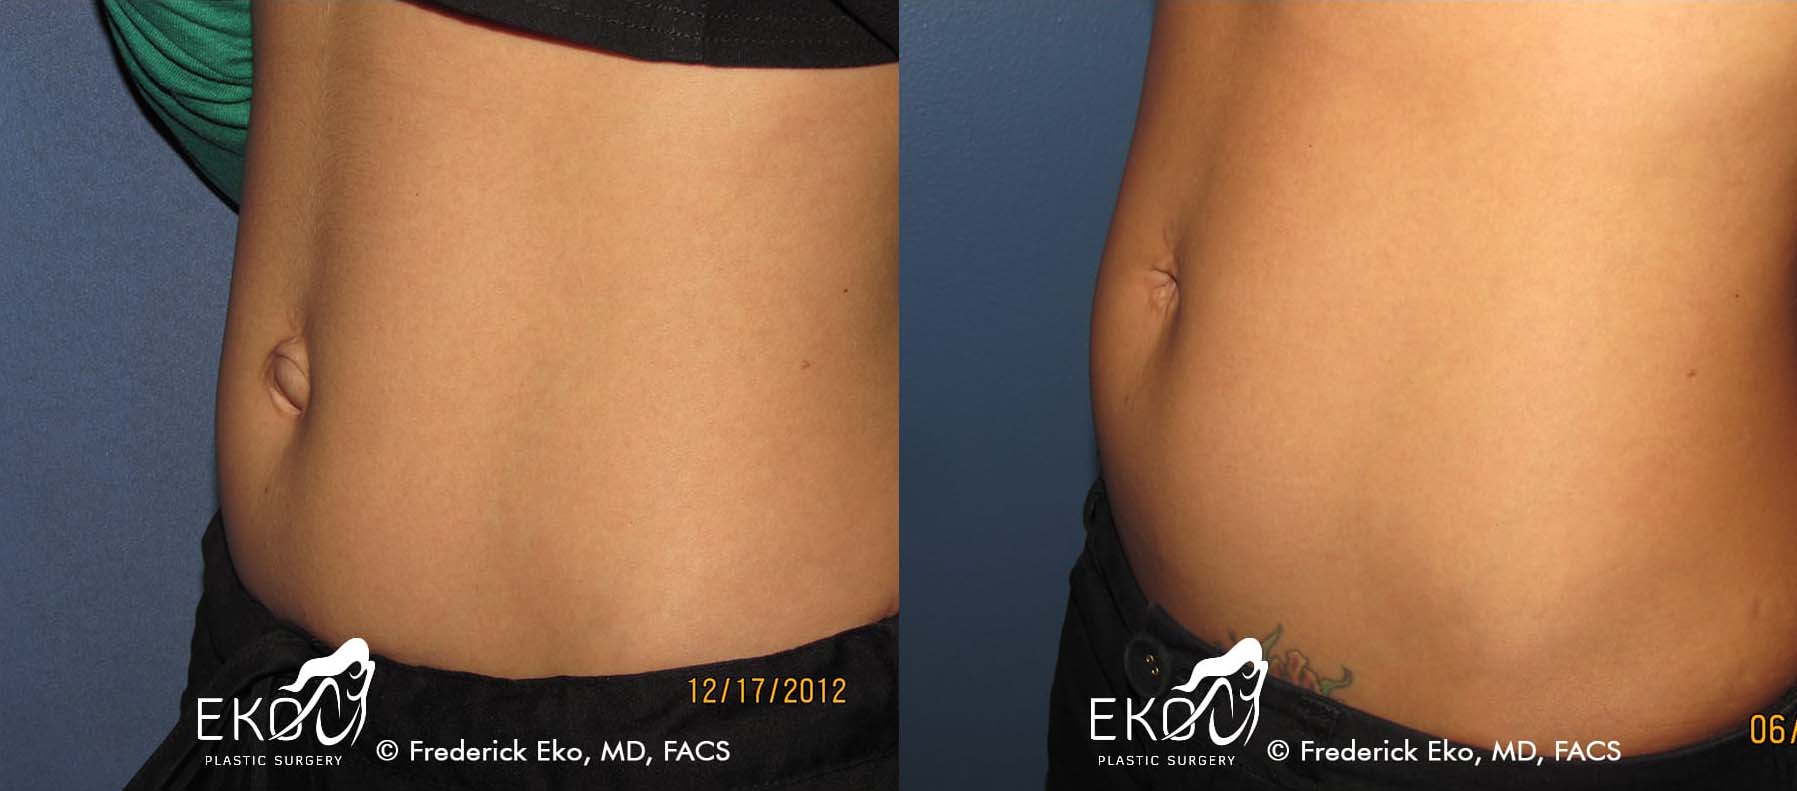 Belly Button Surgery (Umbilicoplasty) Before and After Photo by Dr. Eko of Eko Plastic Surgery in Palm Desert, CA